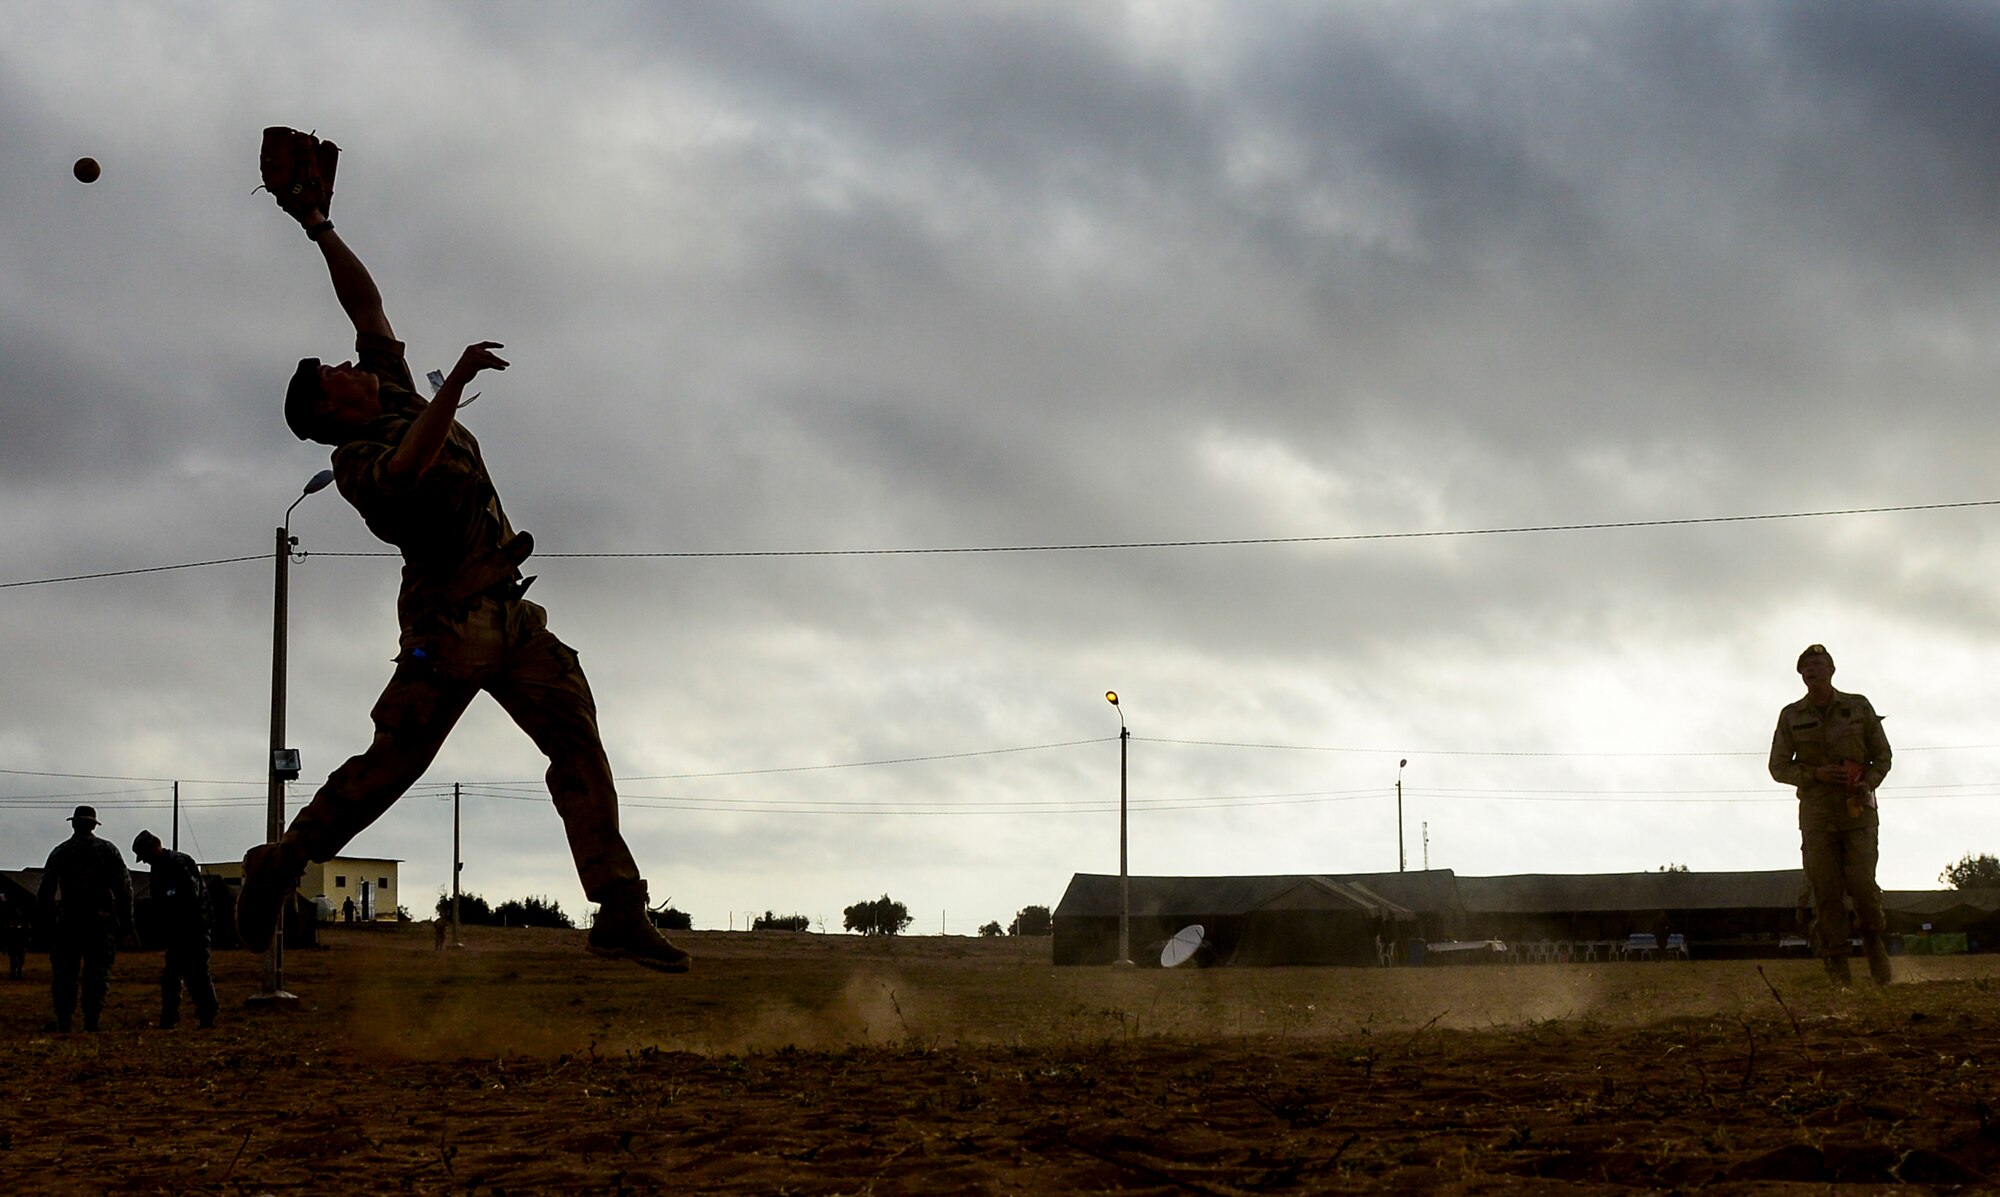 A Royal Netherlands Army soldier attempts to catch a baseball while playing catch with other Royal Netherlands soldiers and U.S. Marines after a day of training during AFRICAN LION 16 at Tifnit, Kingdom of Morocco, April 23, 2016. The exercise provided an opportunity to become familiar with the procedures of allied forces as well as including down time in the evening for military members from 11 different nations to get to know one another. (U.S. Air Force photo by Senior Airman Krystal Ardrey/Released)